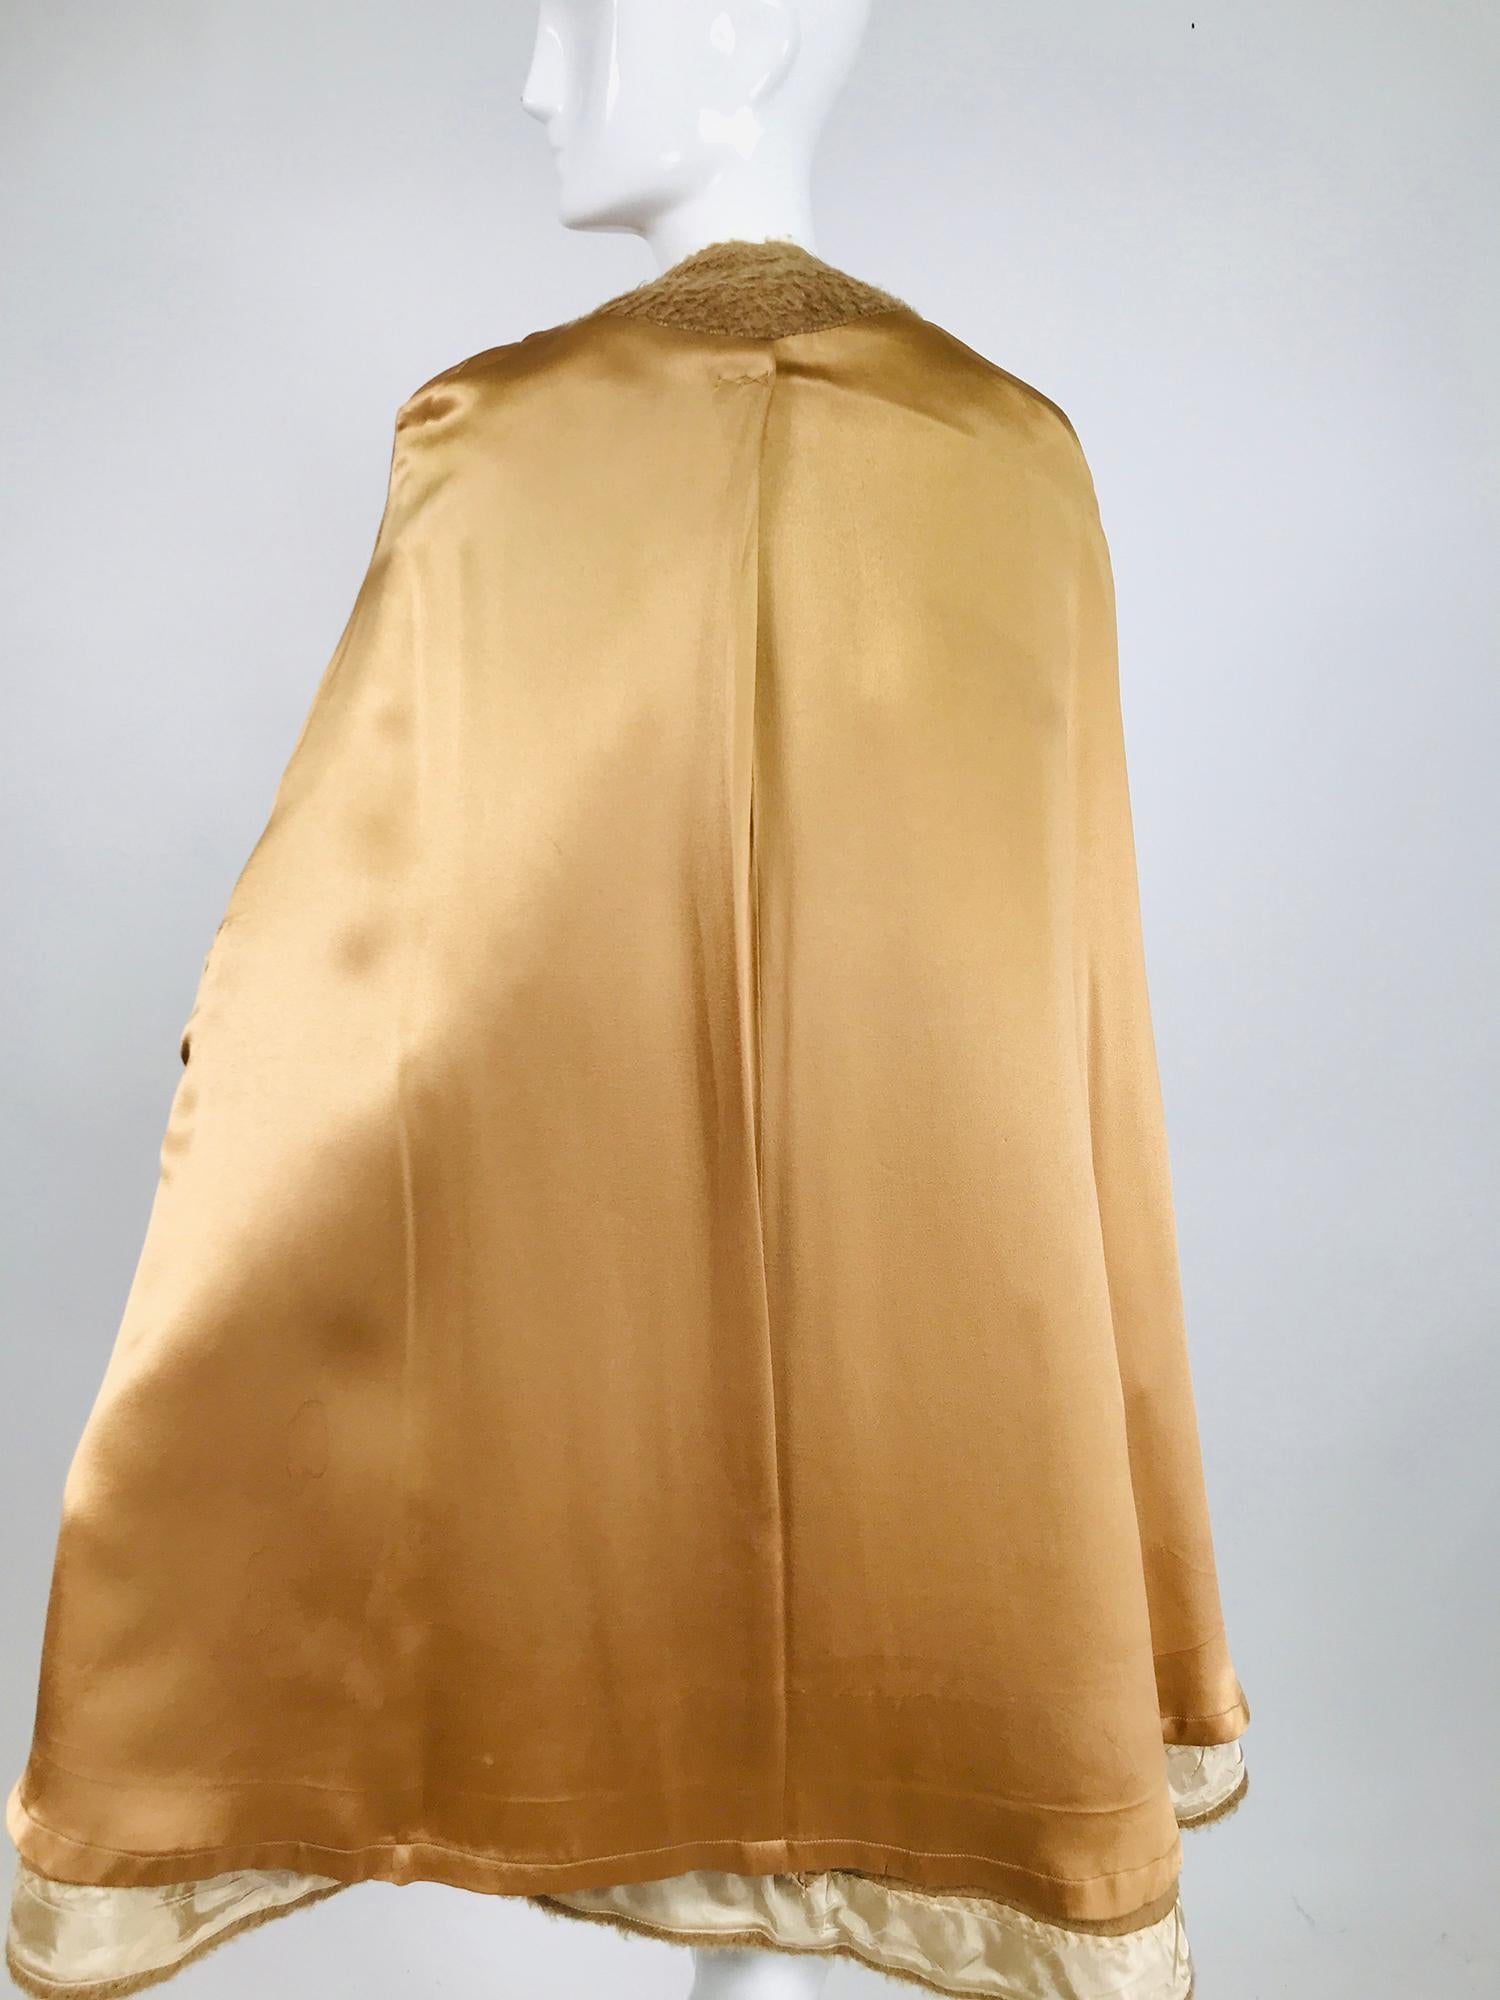 Vintage Camel Tan Mohair Cape Coat with Mink Collar 1960s 8